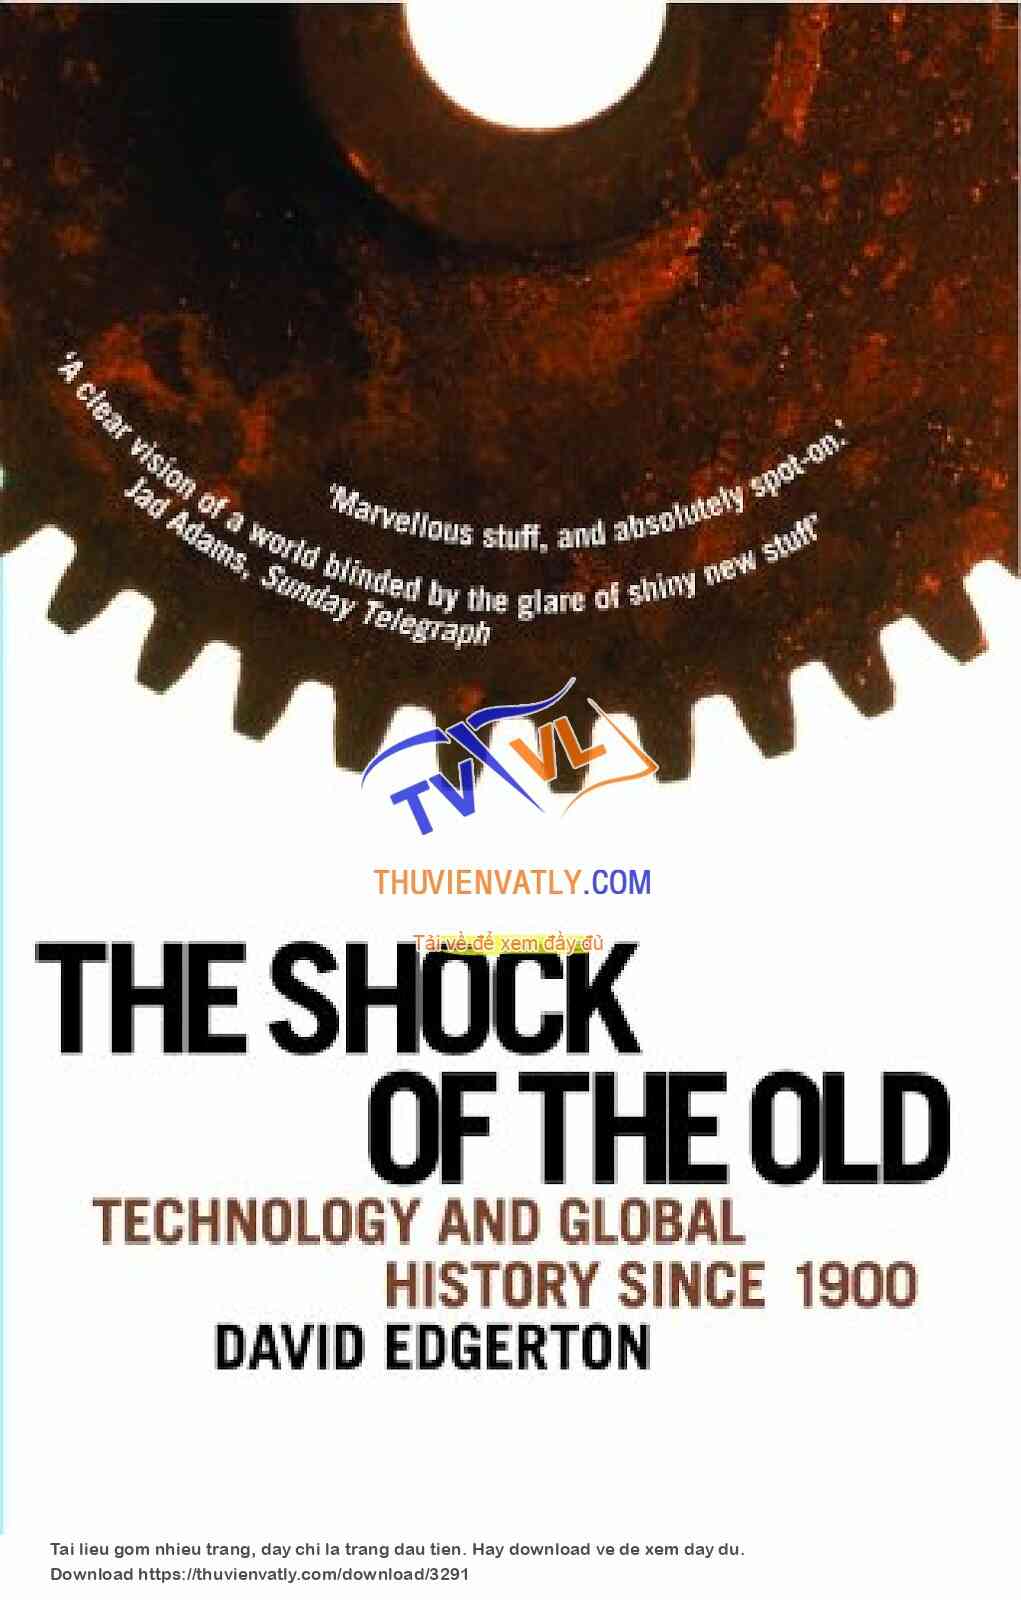 The Shock of the Old Technology and Global History Since 1900